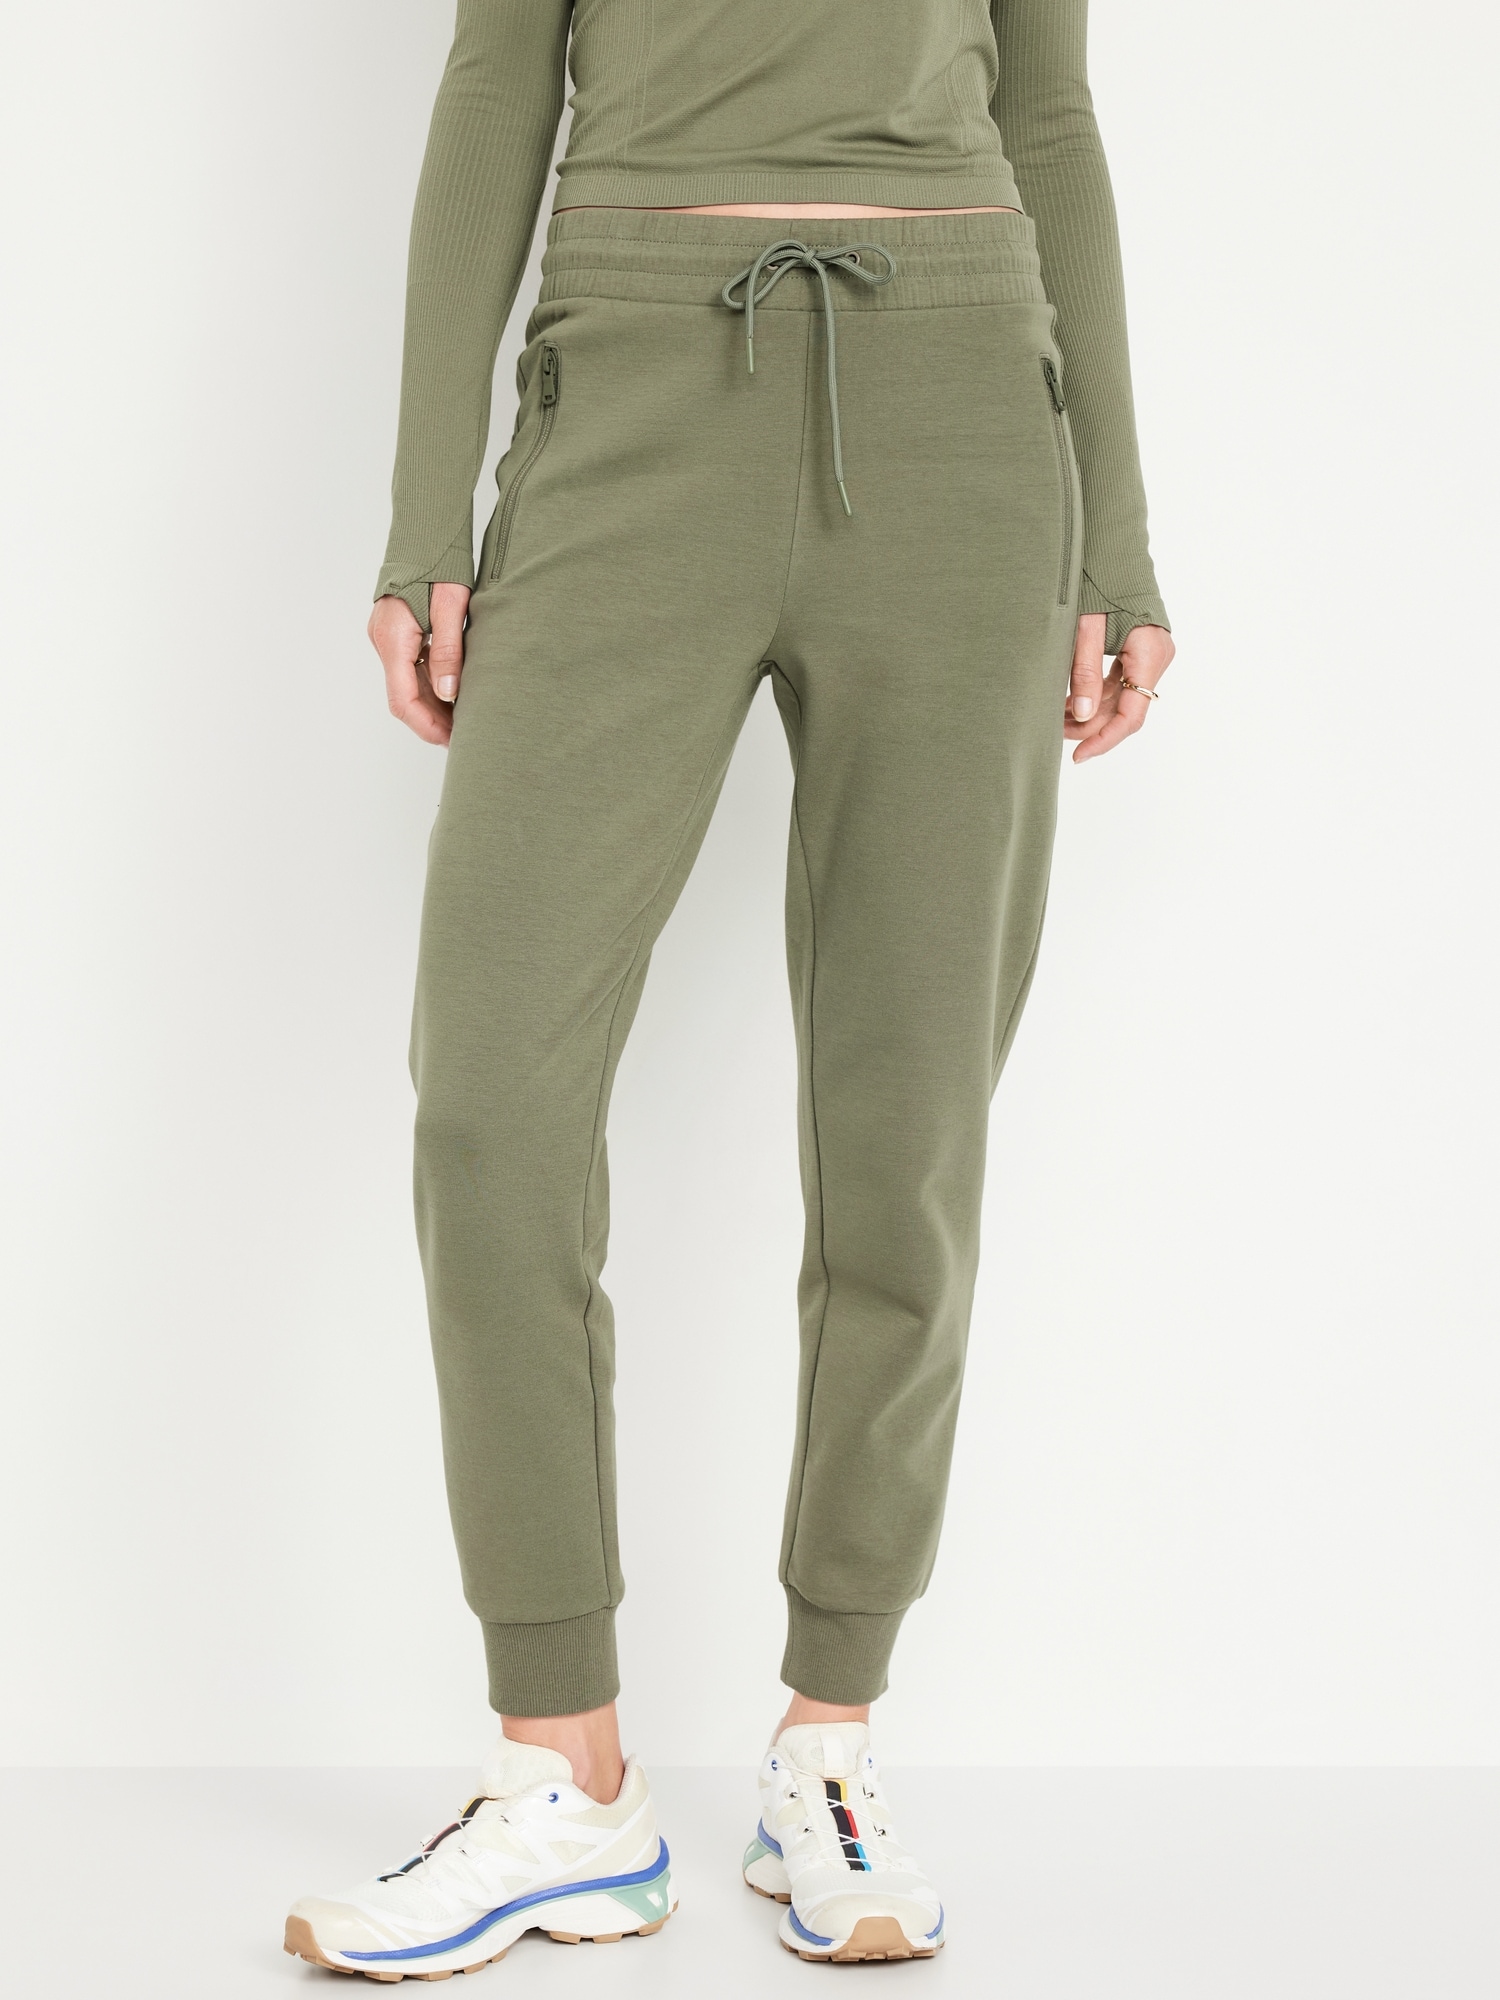 Buy Jogger Pants with Drawstring Waist Online at Best Prices in